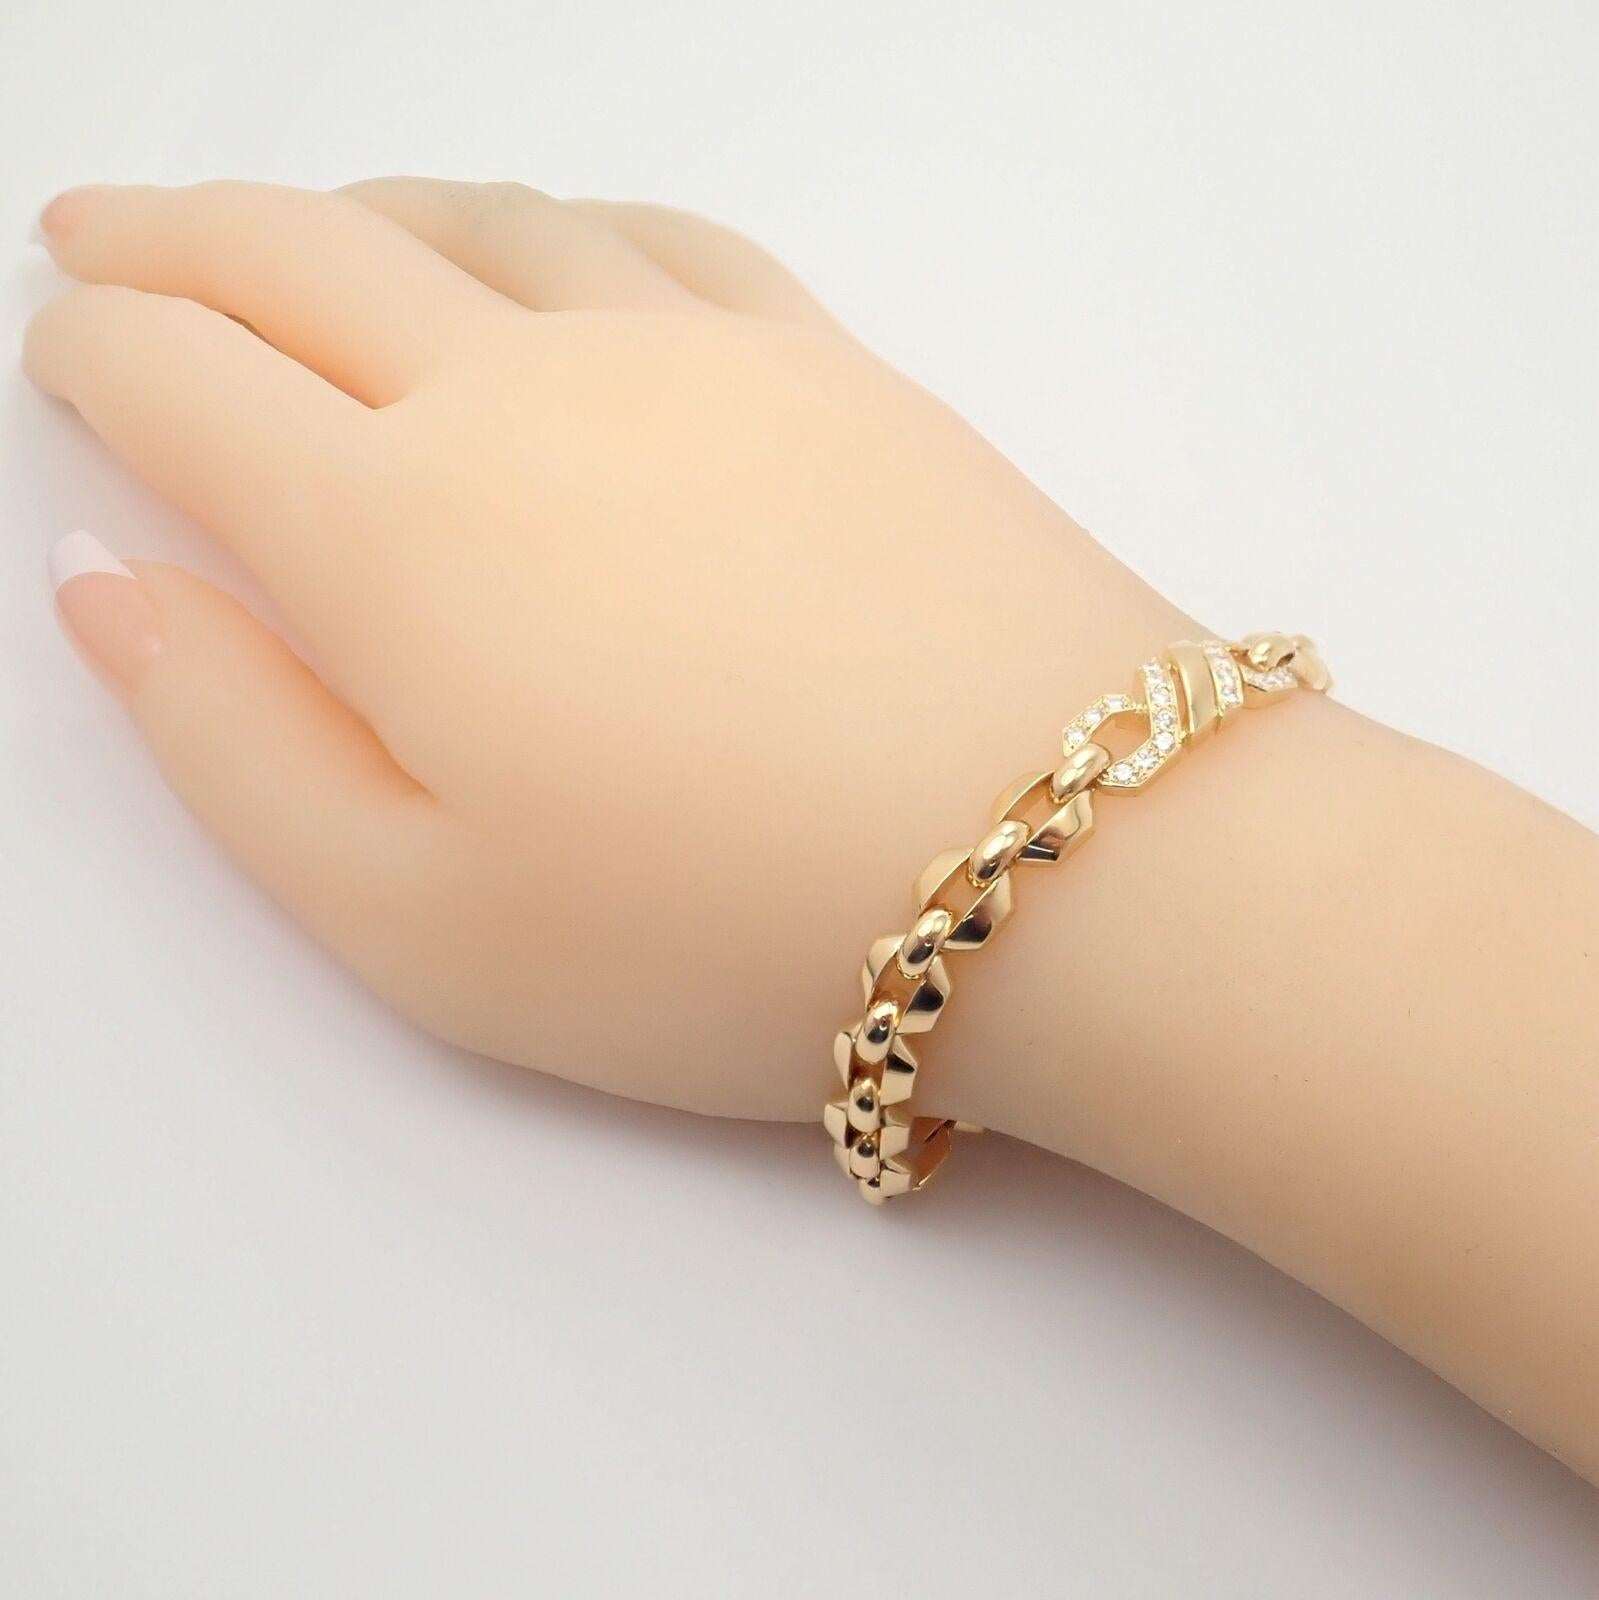 Cartier Fox Trot Diamond Yellow Gold Bracelet In Excellent Condition For Sale In Holland, PA